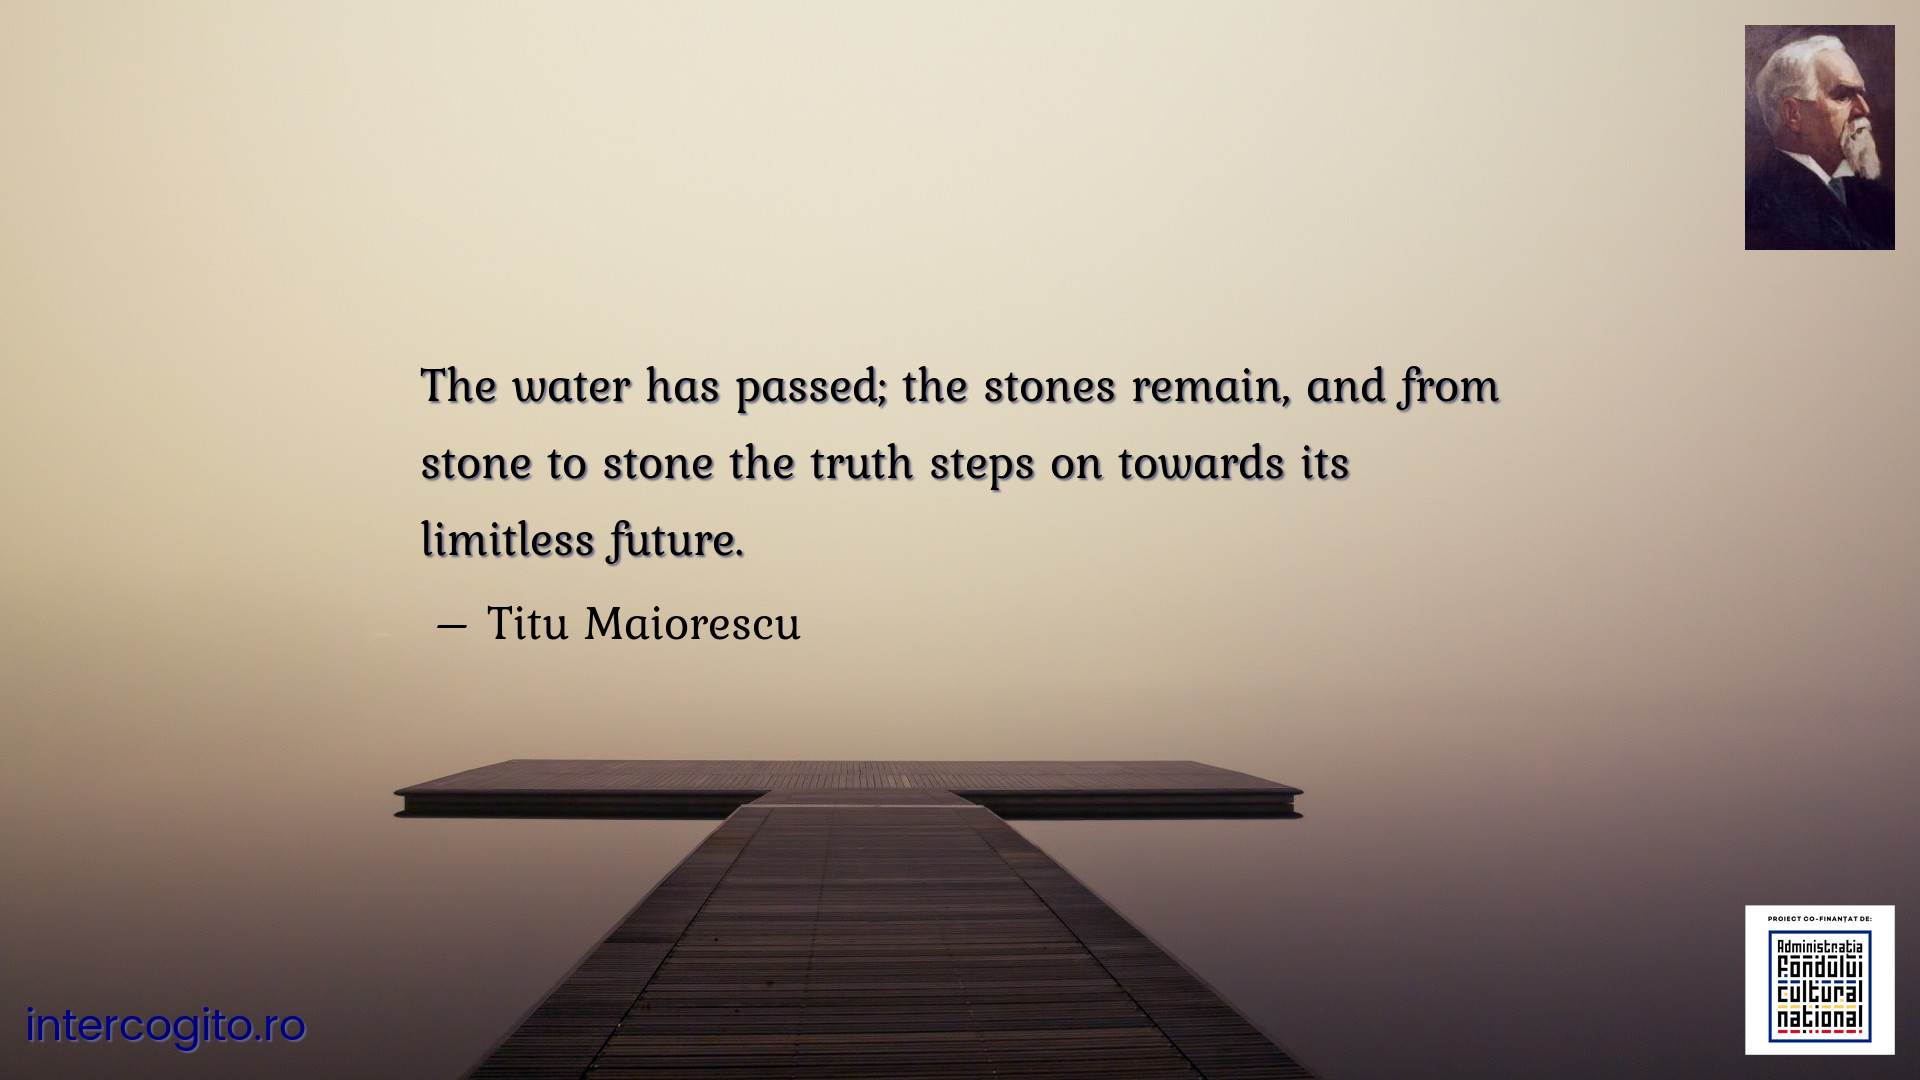 The water has passed; the stones remain, and from stone to stone the truth steps on towards its limitless future.